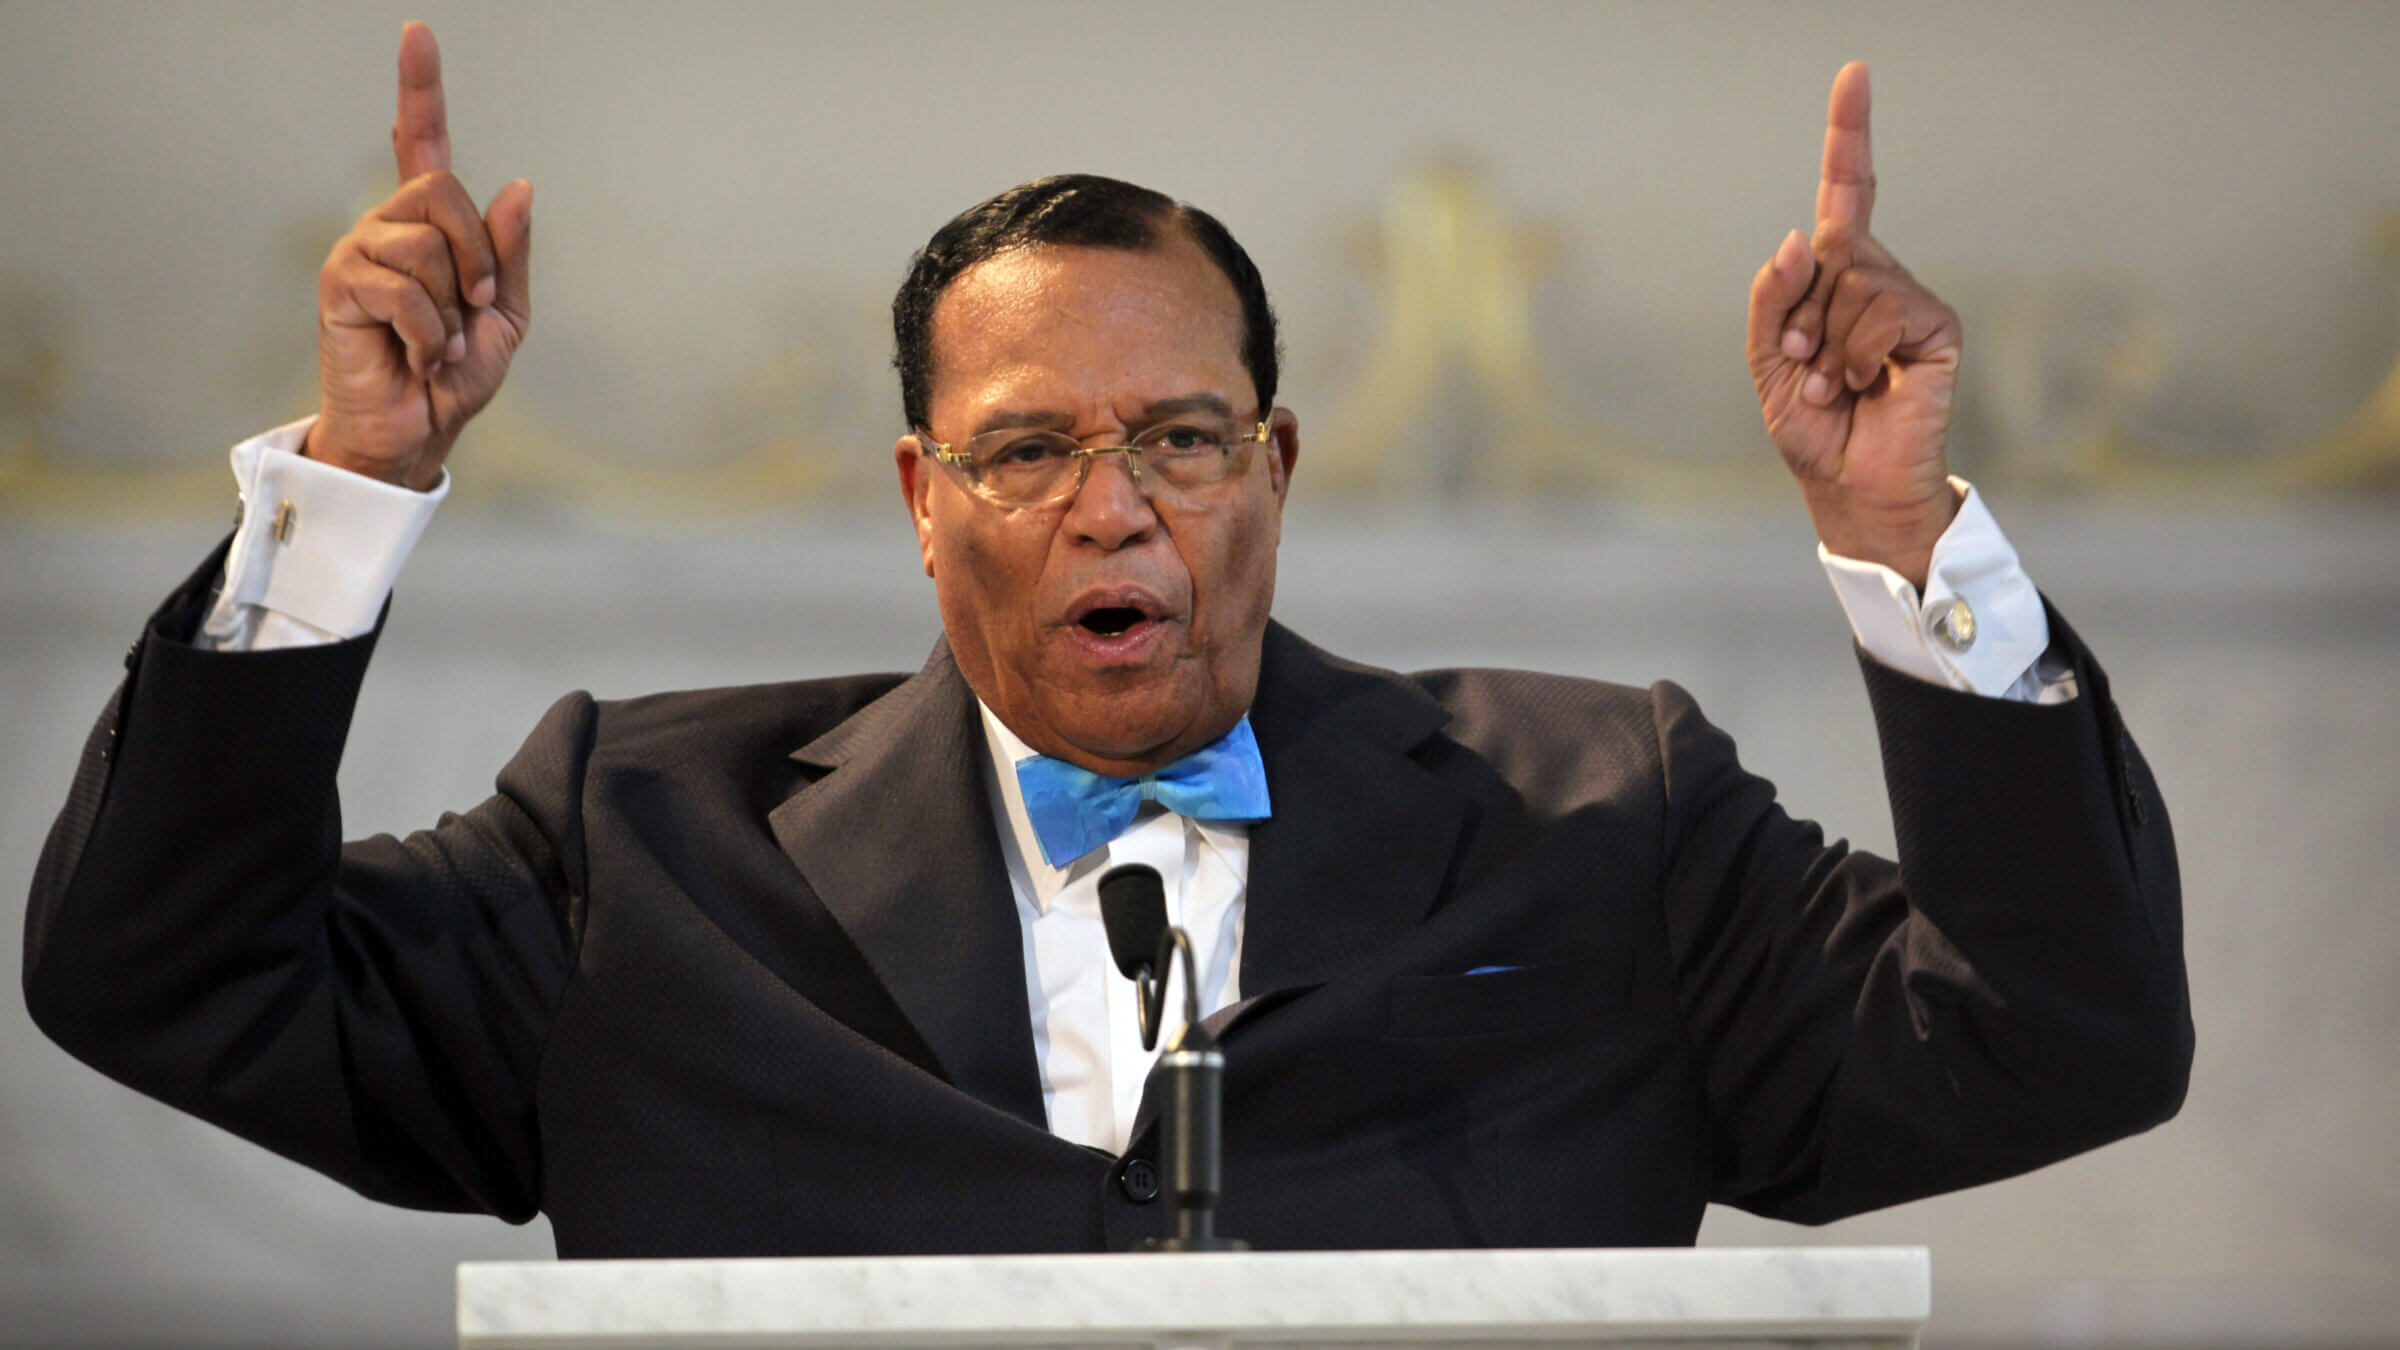 Minister Louis Farrakhan, leader of the Nation of Islam.